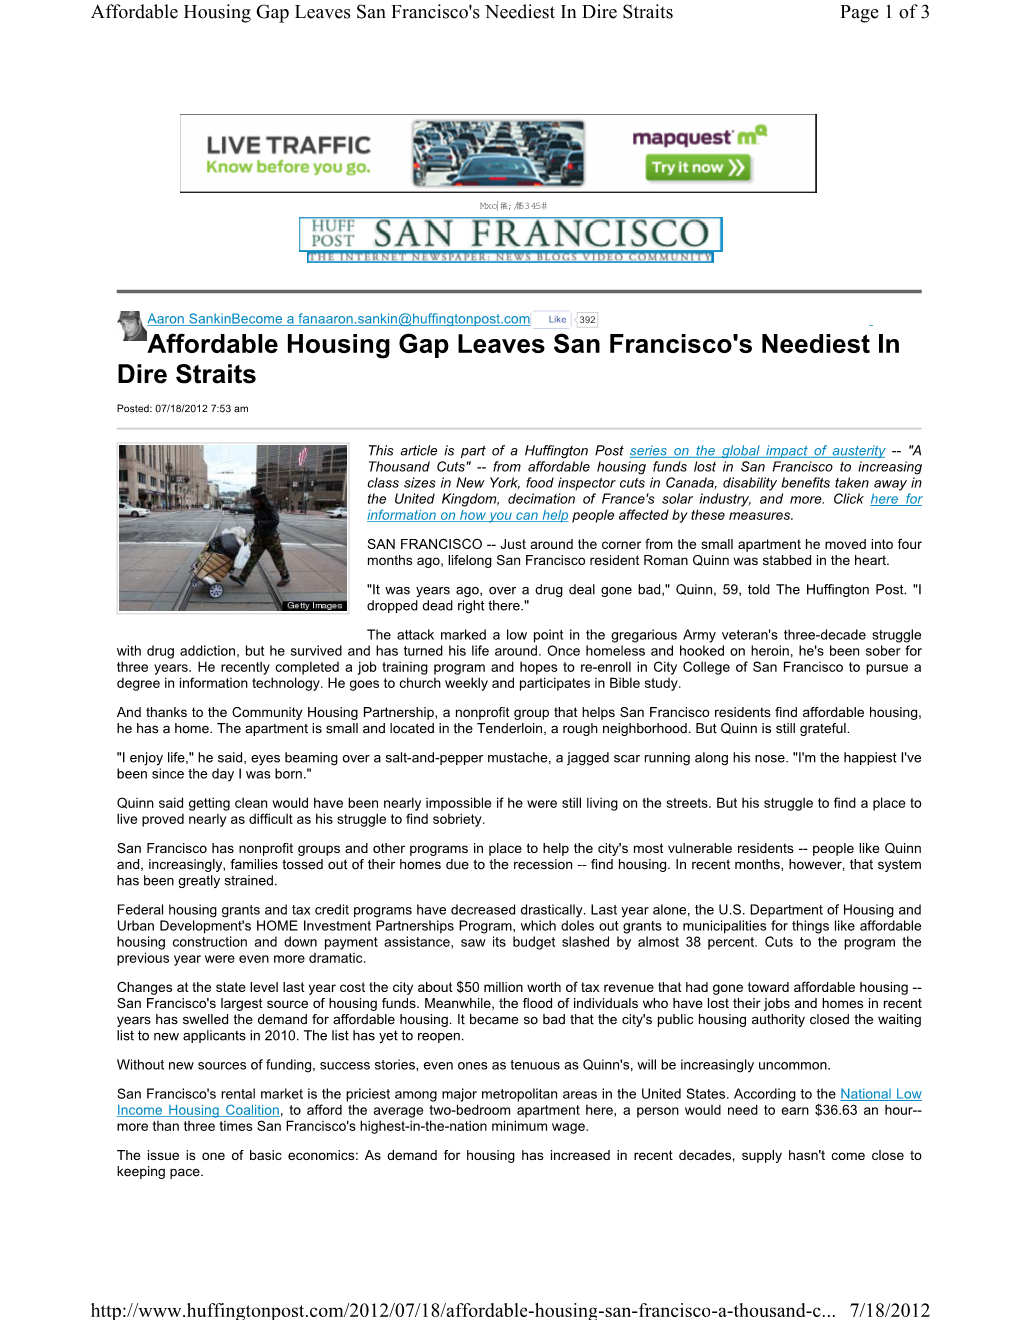 Affordable Housing Gap Leaves San Francisco's Neediest in Dire Straits Page 1 of 3